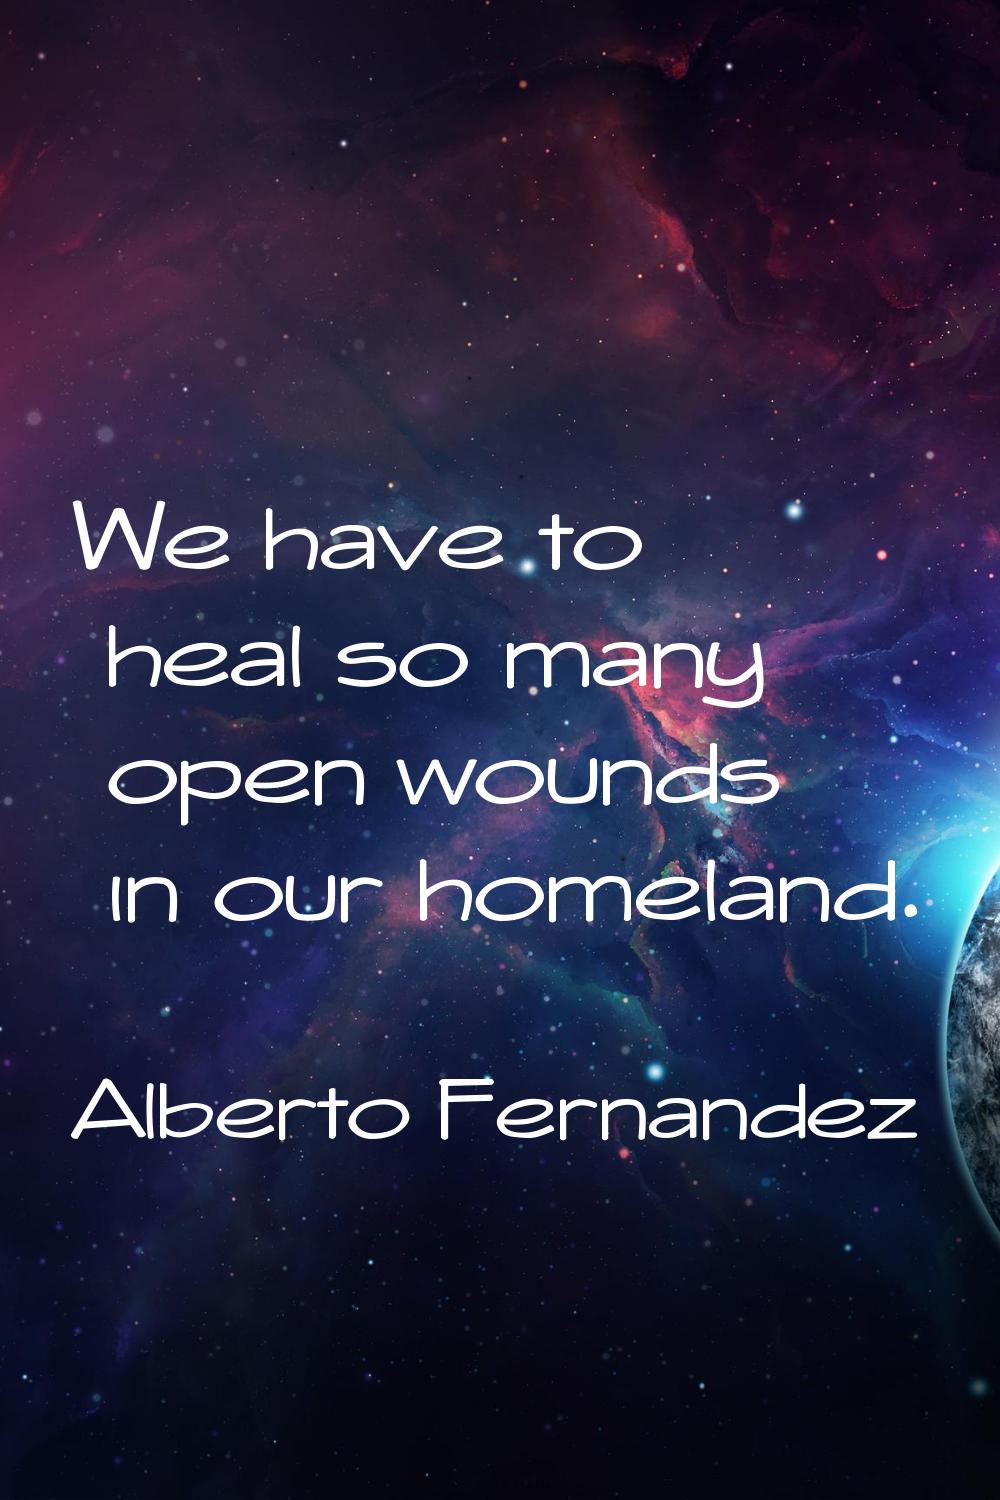 We have to heal so many open wounds in our homeland.